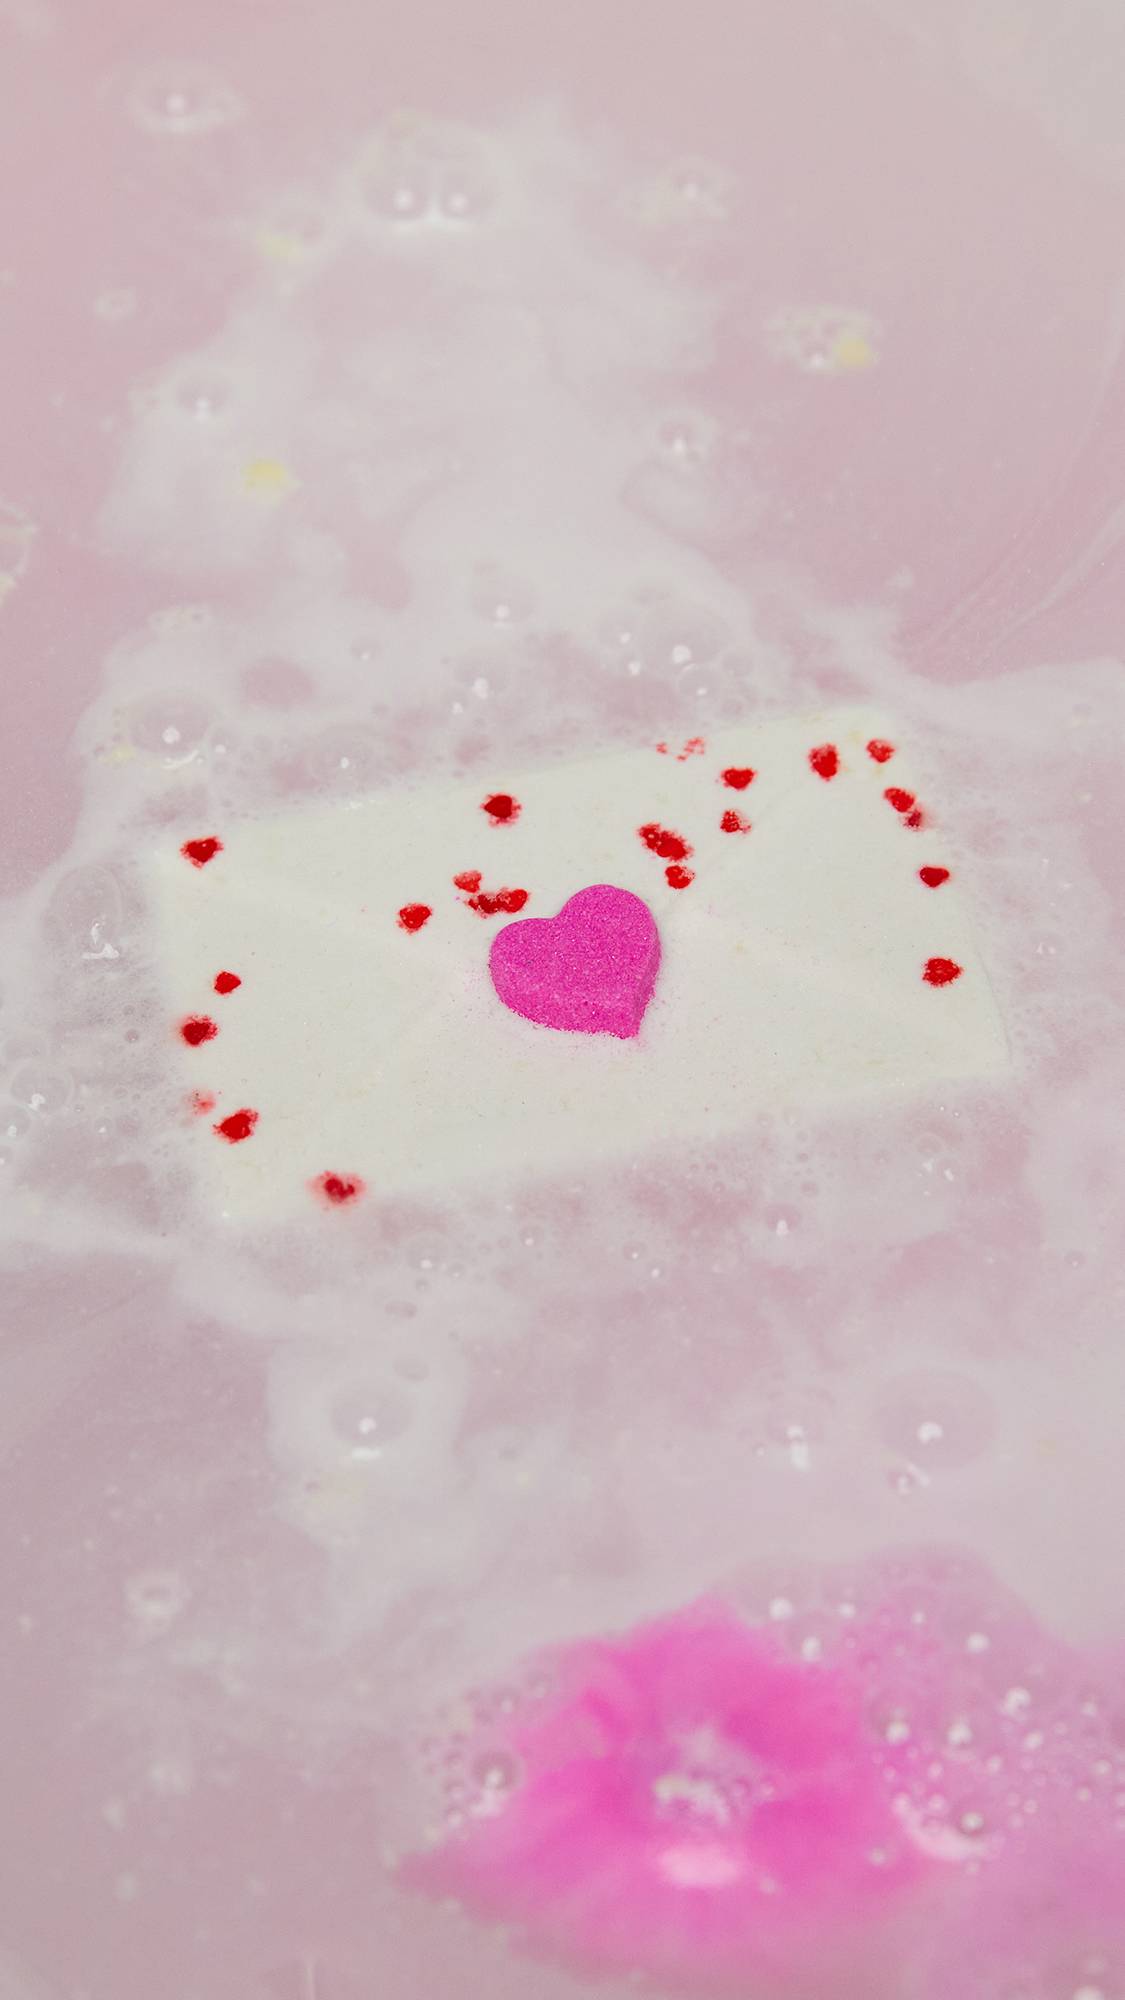 The Love Letter bath bomb dissolves in the bath water, slowly releasing delicate swirls of pale pink and white 